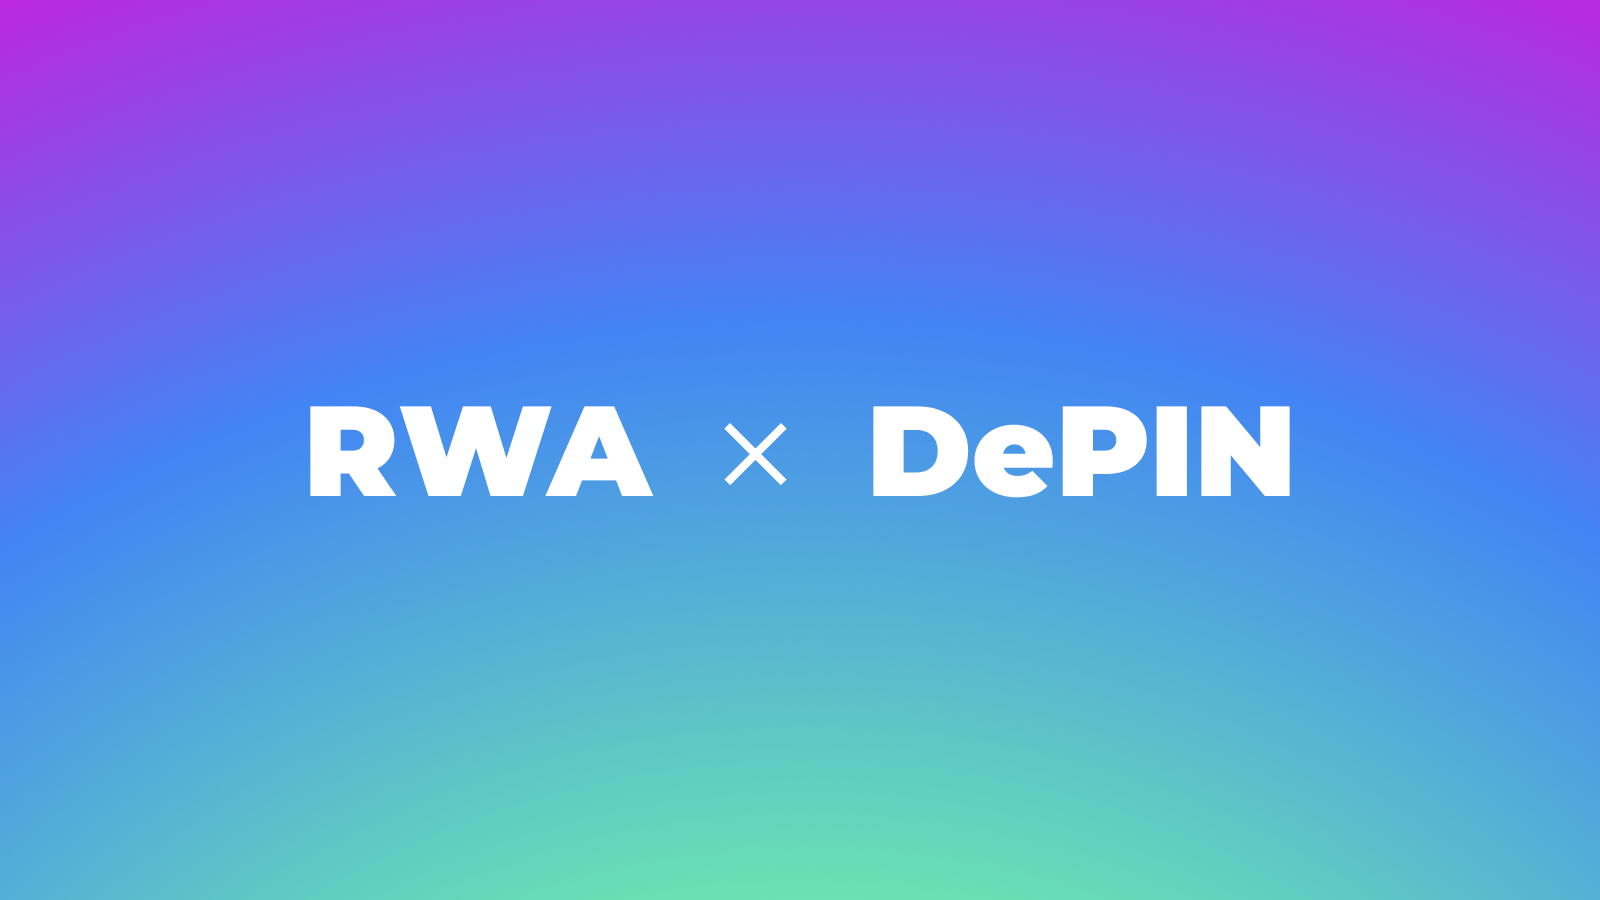 What are Real World Assets (RWA) and DePIN?